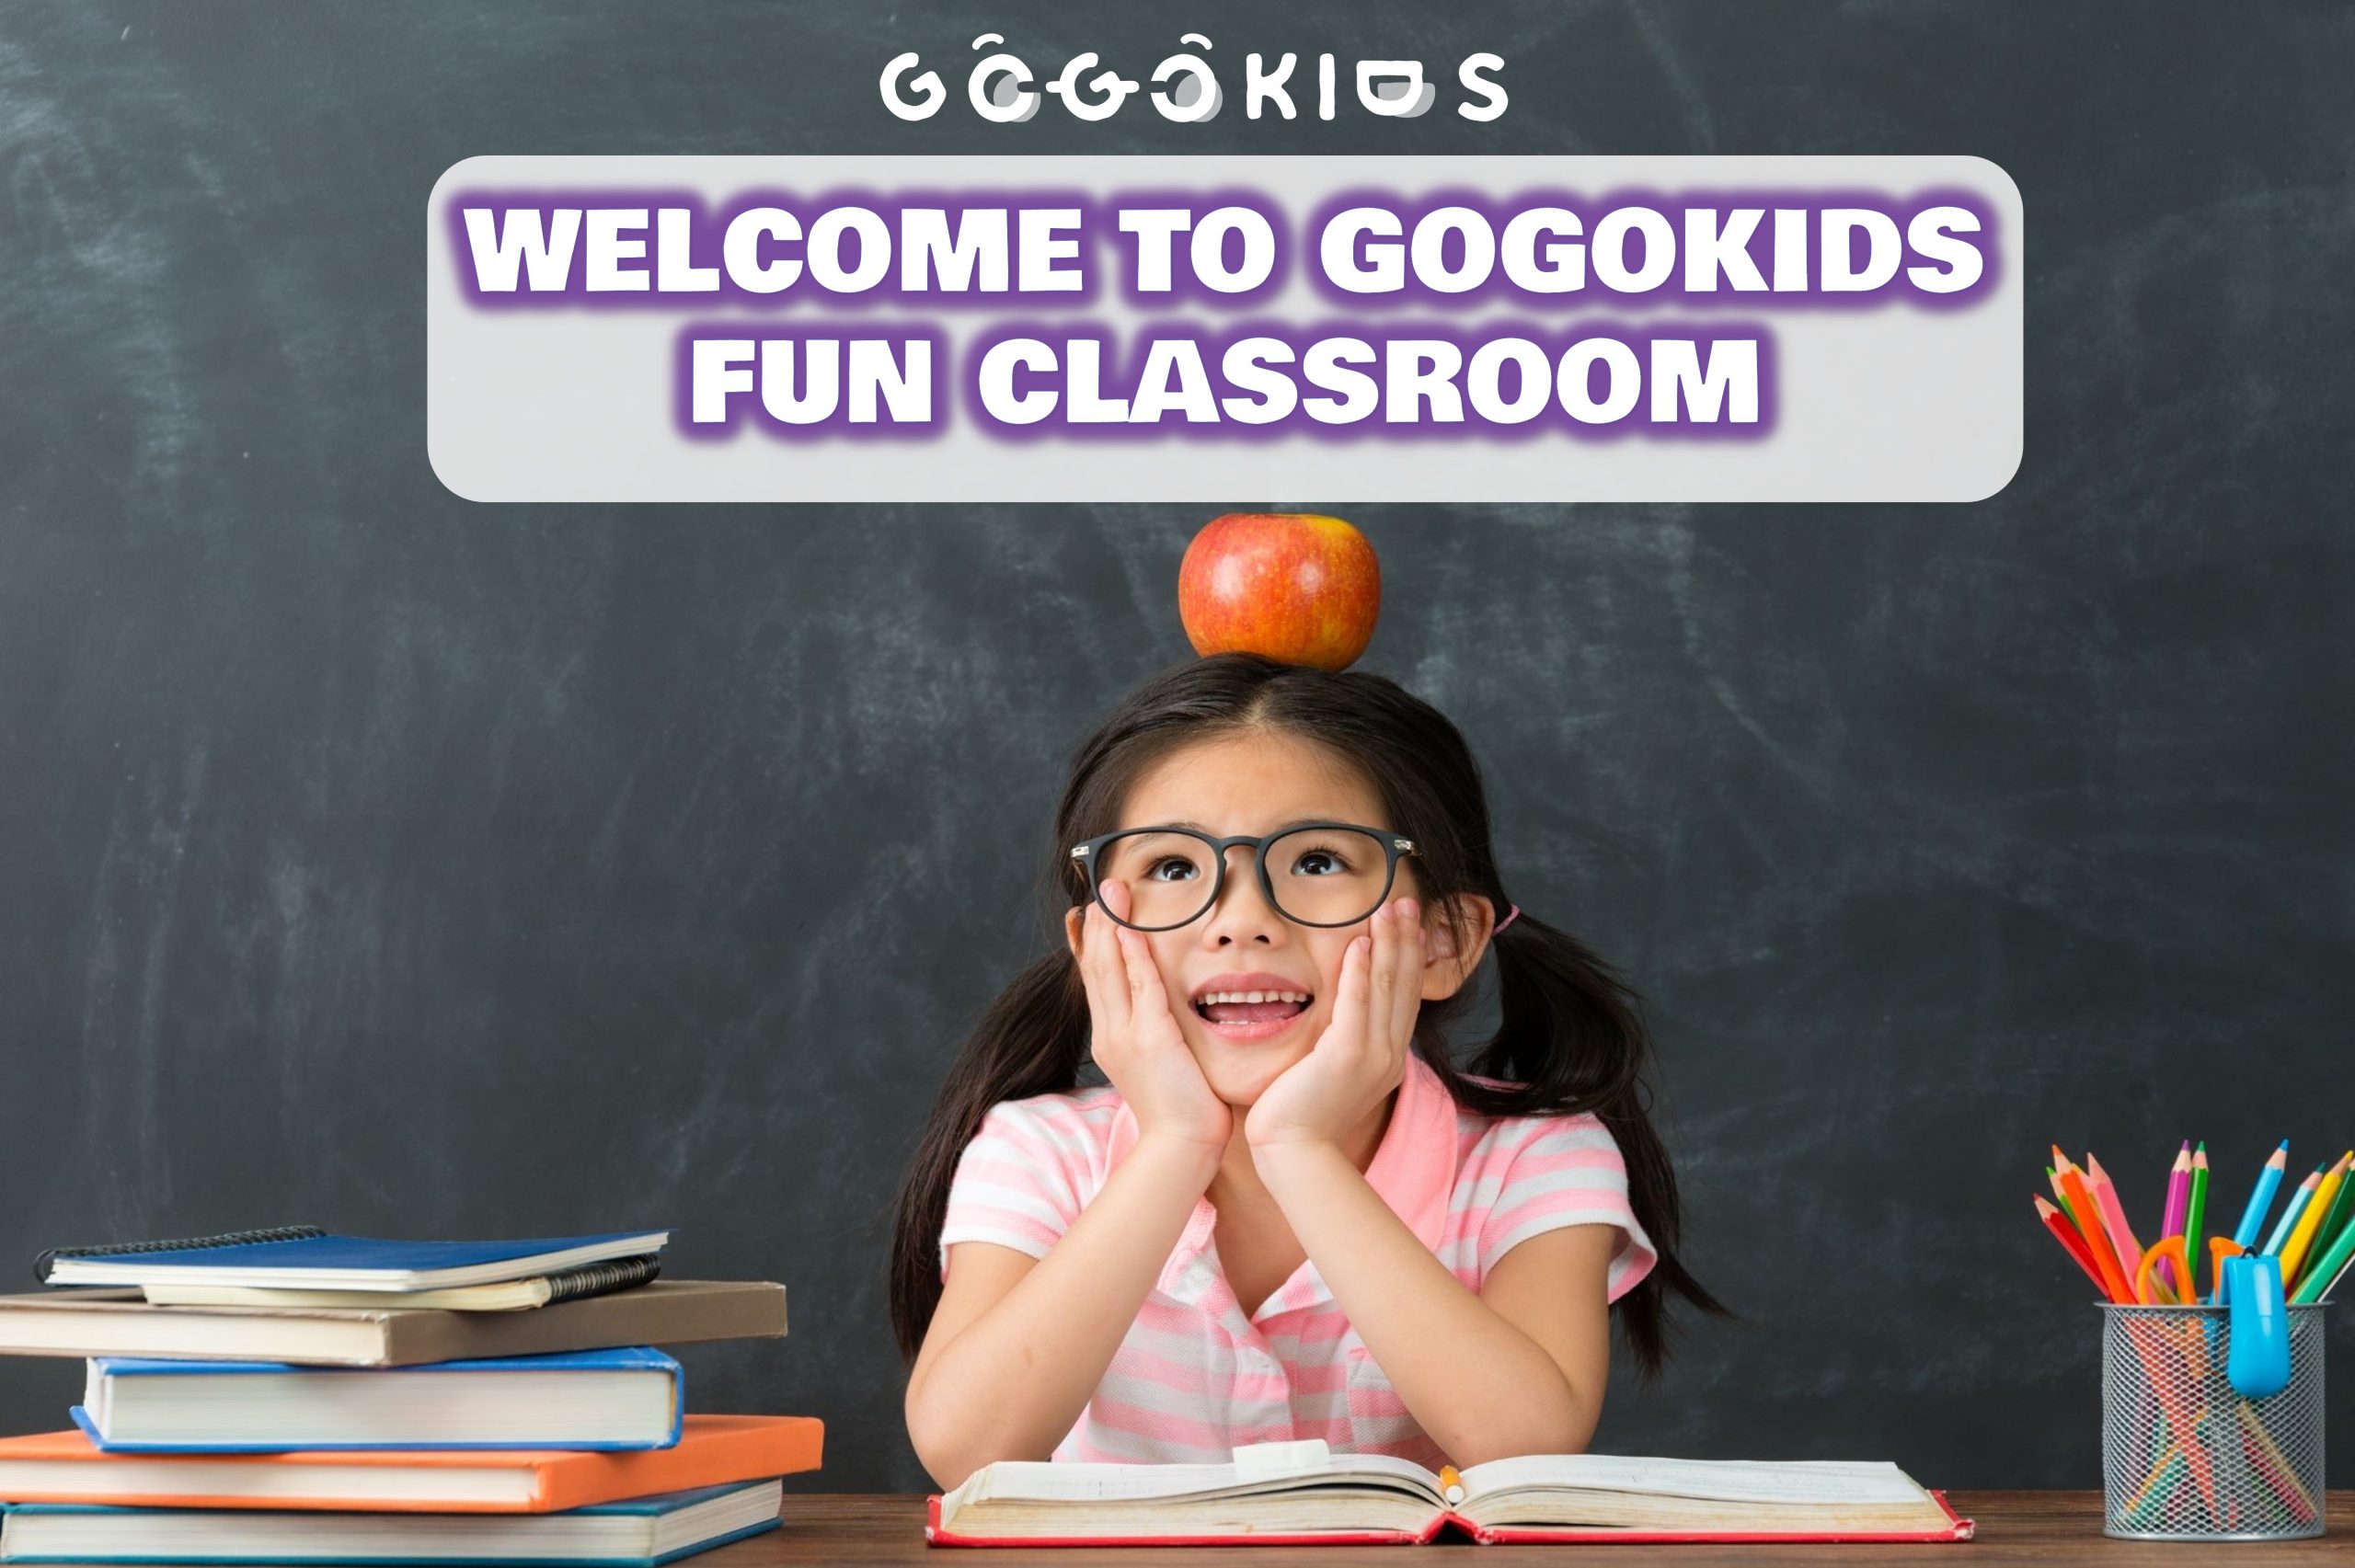 Welcome to GogoKids Fun Classroom. Start Your Fun Learning Journey Here!